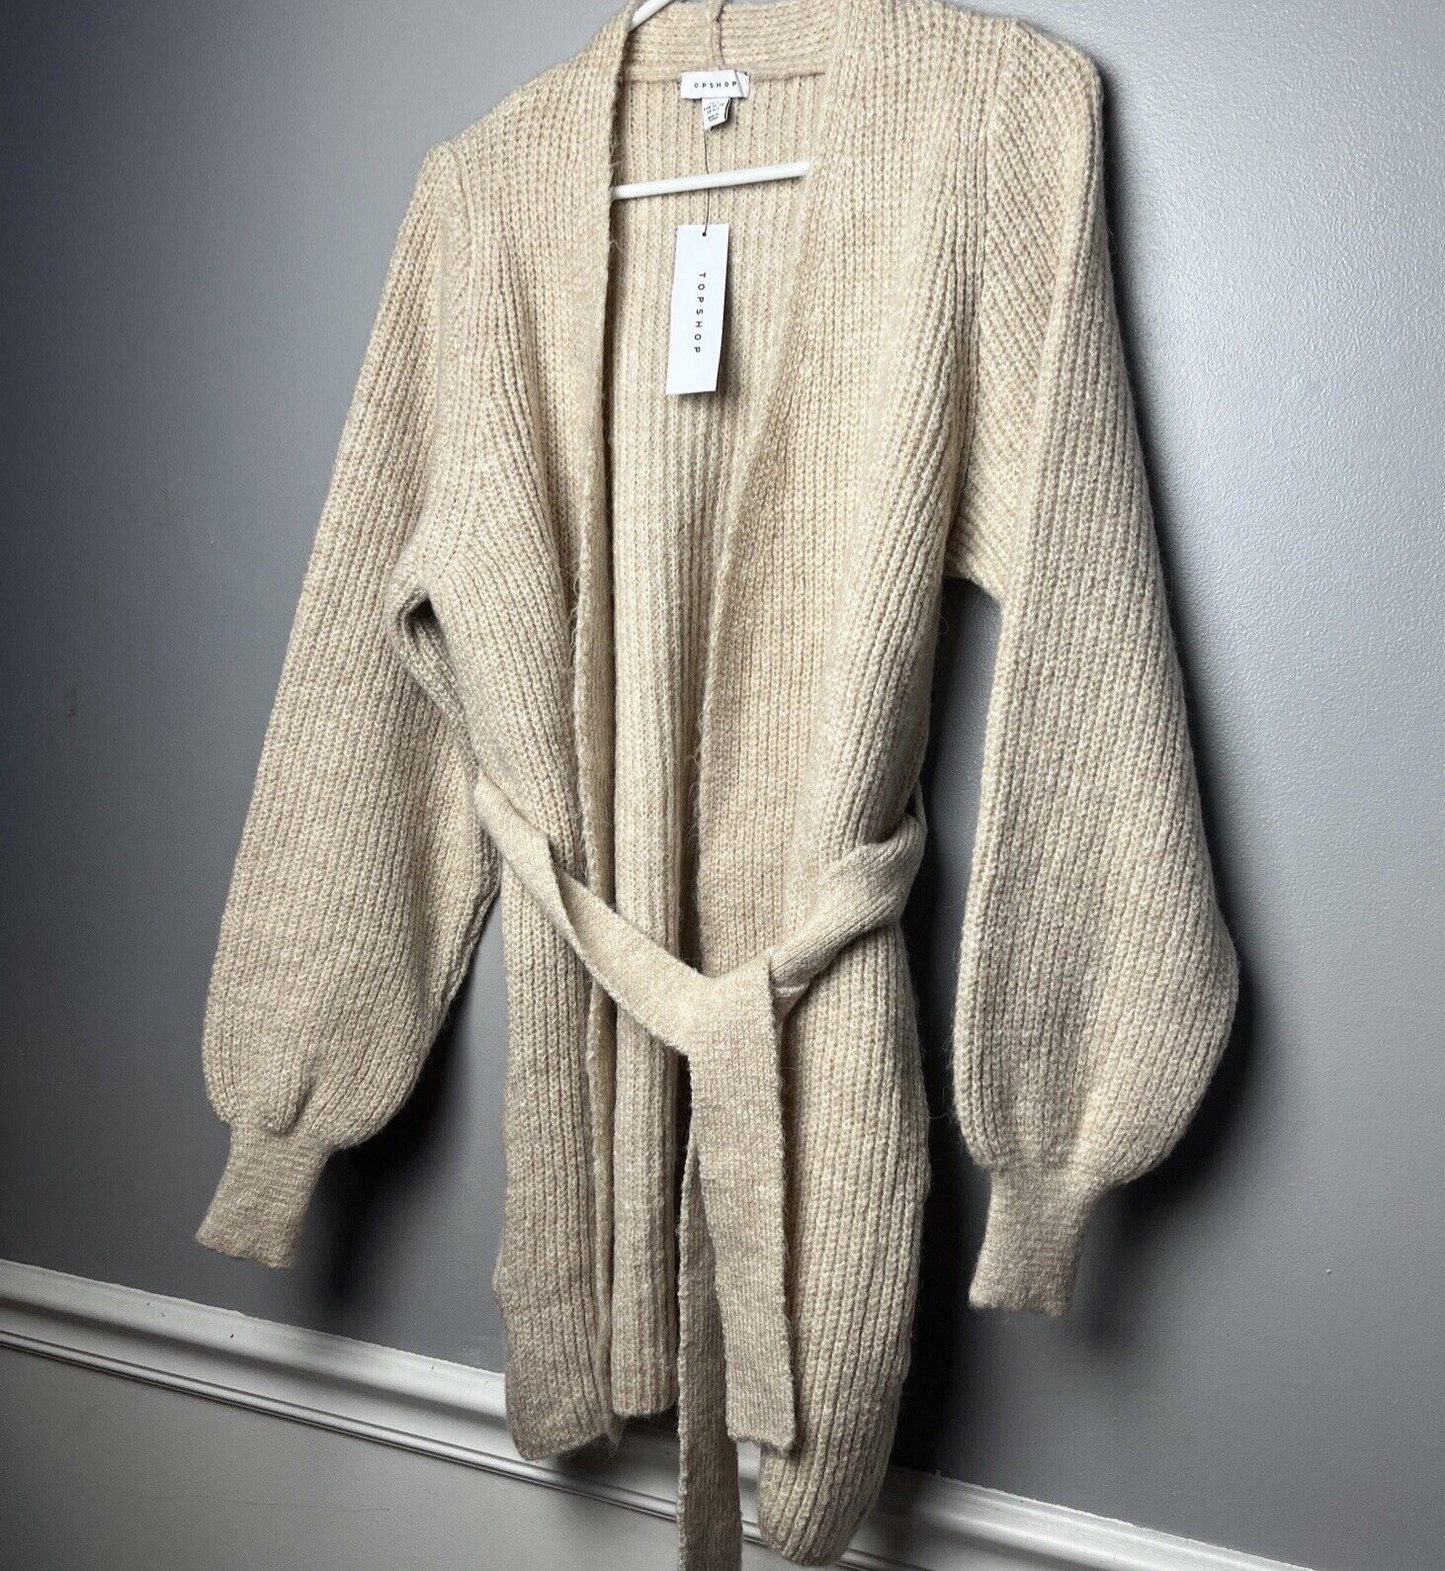 TOPSHOP Cardigan SWEATER KNIT Stone Belted BLOUSON SLEEVE Chunky Size S (4 - 6)